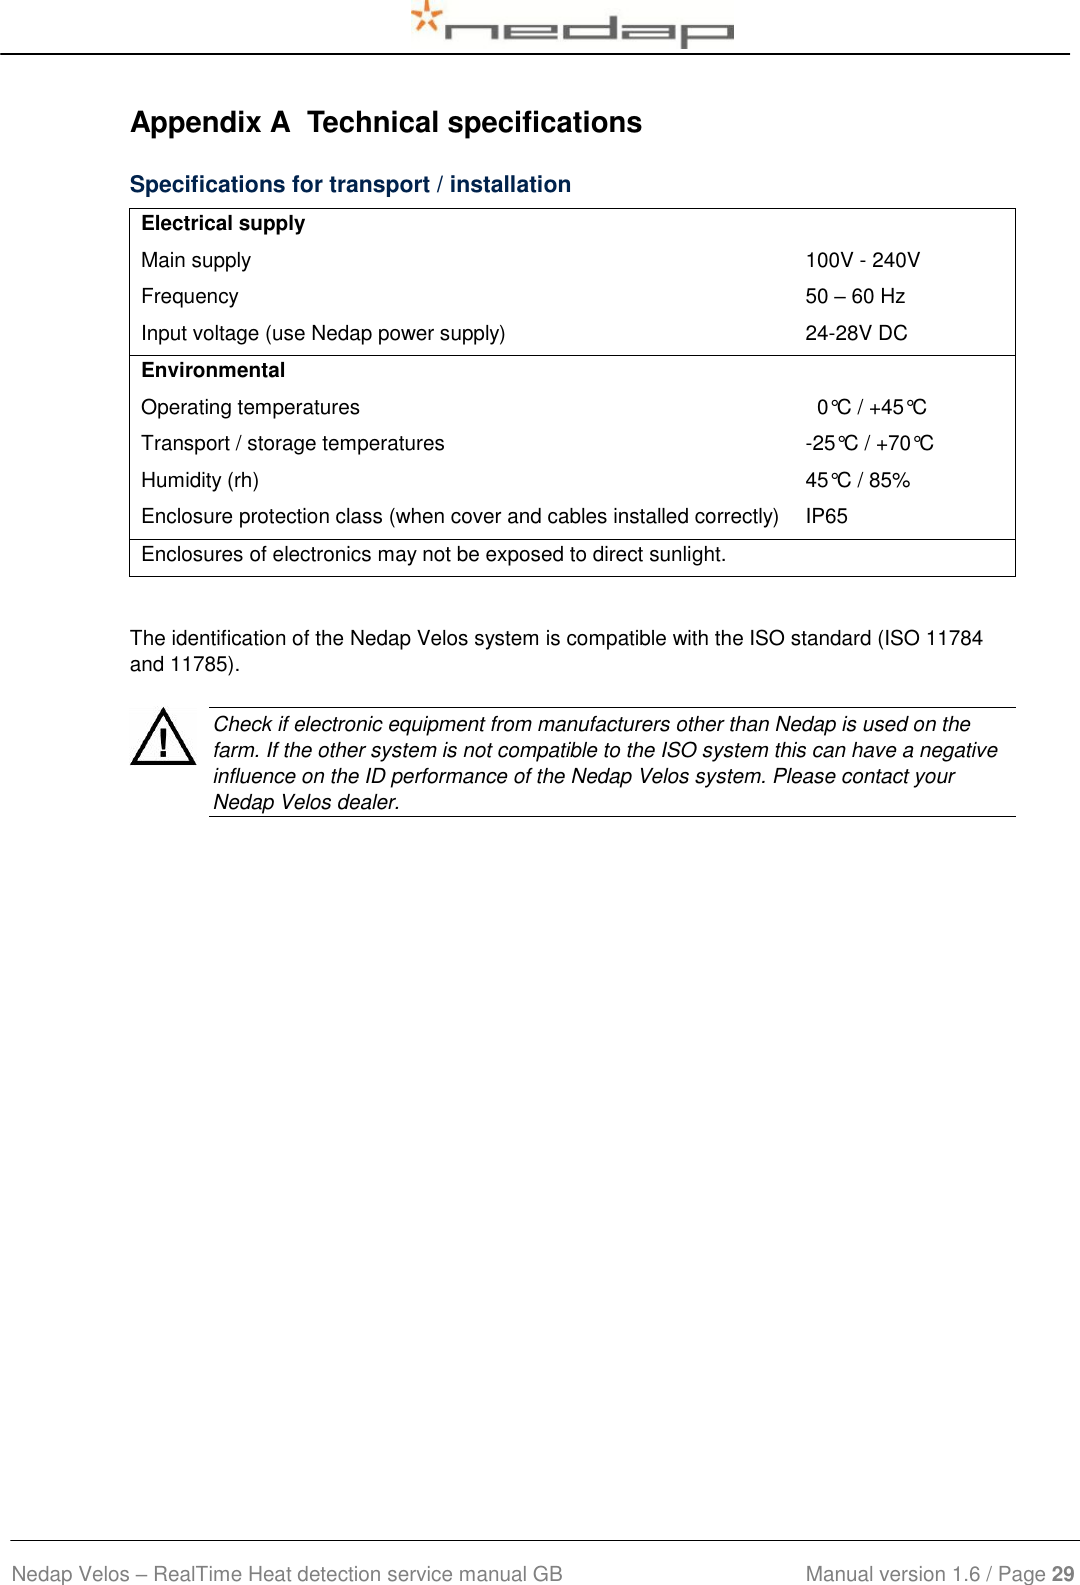  Nedap Velos – RealTime Heat detection service manual GB                            Manual version 1.6 / Page 29  Appendix A  Technical specifications Specifications for transport / installation  Electrical supply Main supply   100V - 240V Frequency 50 – 60 Hz Input voltage (use Nedap power supply) 24-28V DC Environmental Operating temperatures   0°C / +45°C Transport / storage temperatures -25°C / +70°C Humidity (rh) 45°C / 85% Enclosure protection class (when cover and cables installed correctly) IP65 Enclosures of electronics may not be exposed to direct sunlight.  The identification of the Nedap Velos system is compatible with the ISO standard (ISO 11784 and 11785).    Check if electronic equipment from manufacturers other than Nedap is used on the farm. If the other system is not compatible to the ISO system this can have a negative influence on the ID performance of the Nedap Velos system. Please contact your Nedap Velos dealer.    